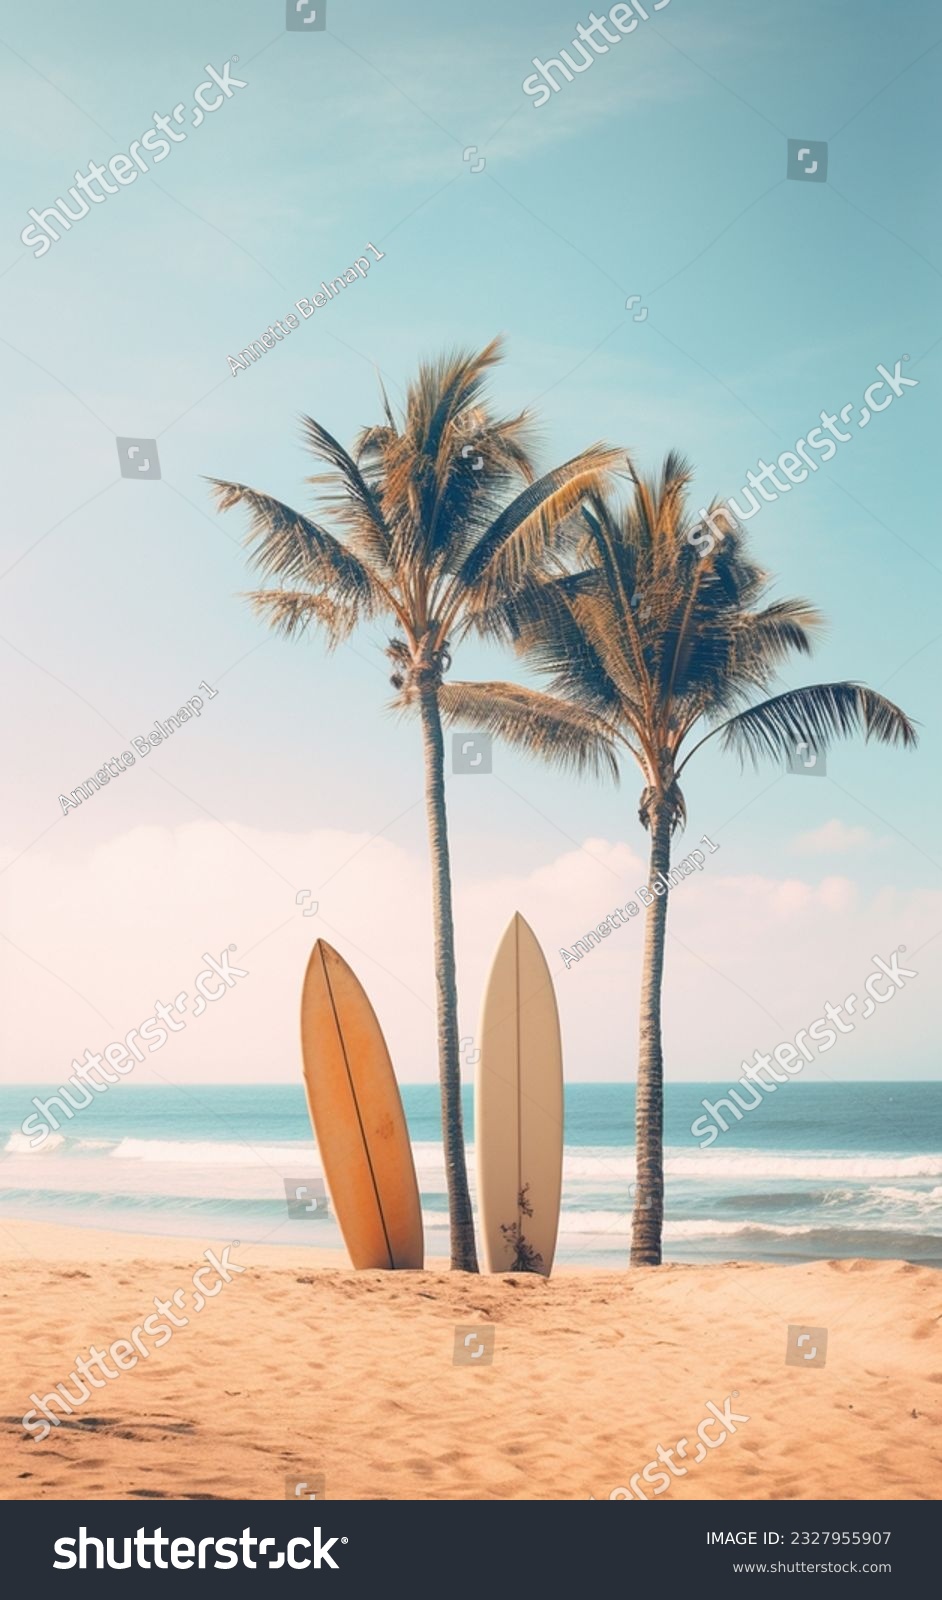 A beach scene with palm trees and surf boards standing up in the sand. Muted colors, soft colors, blue, tan, orange, green, white.  #2327955907